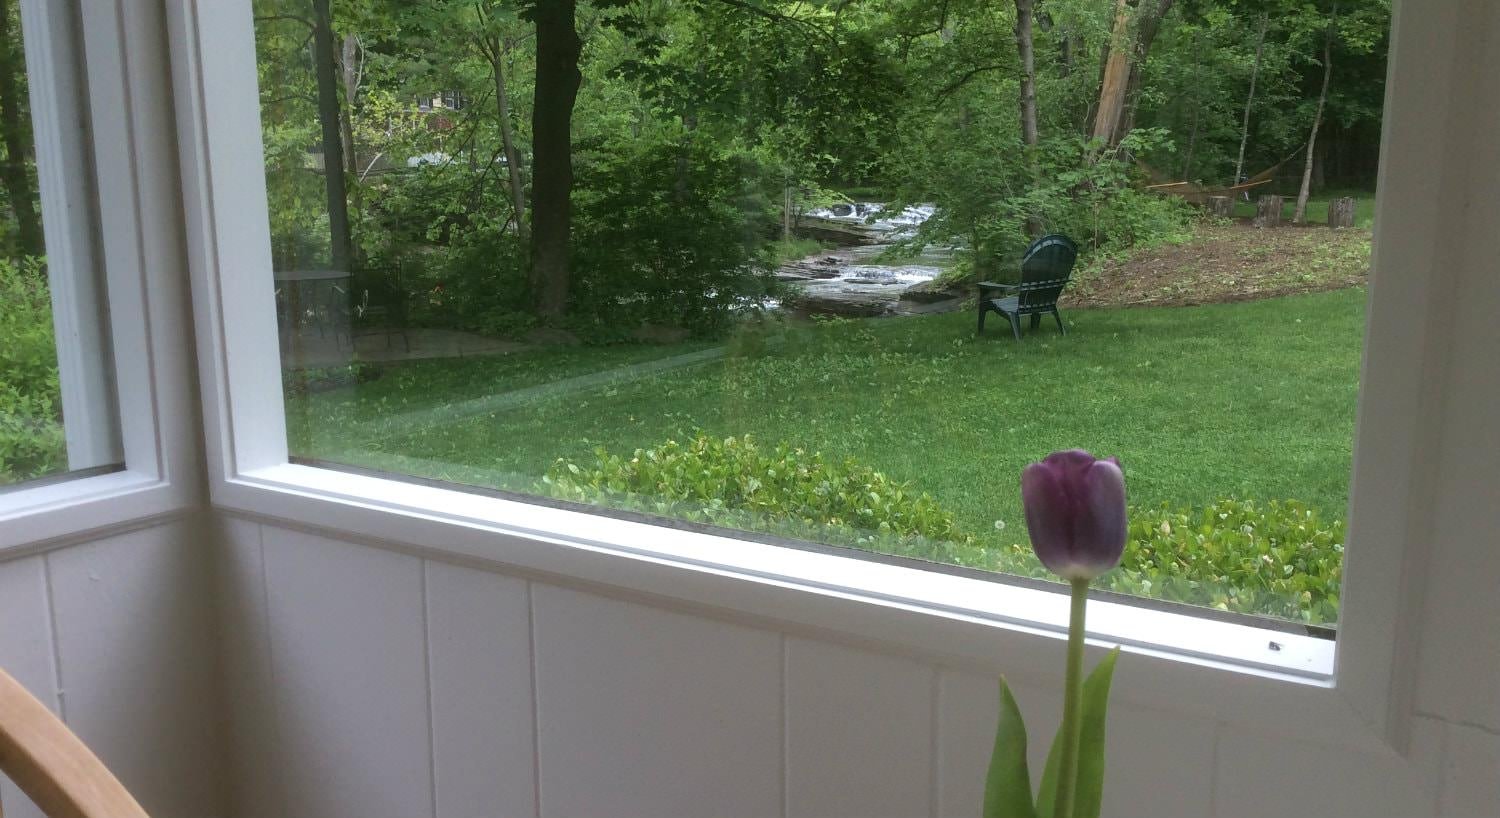 View through the window of a grassy lawn, a rippling stream, and lots of green trees